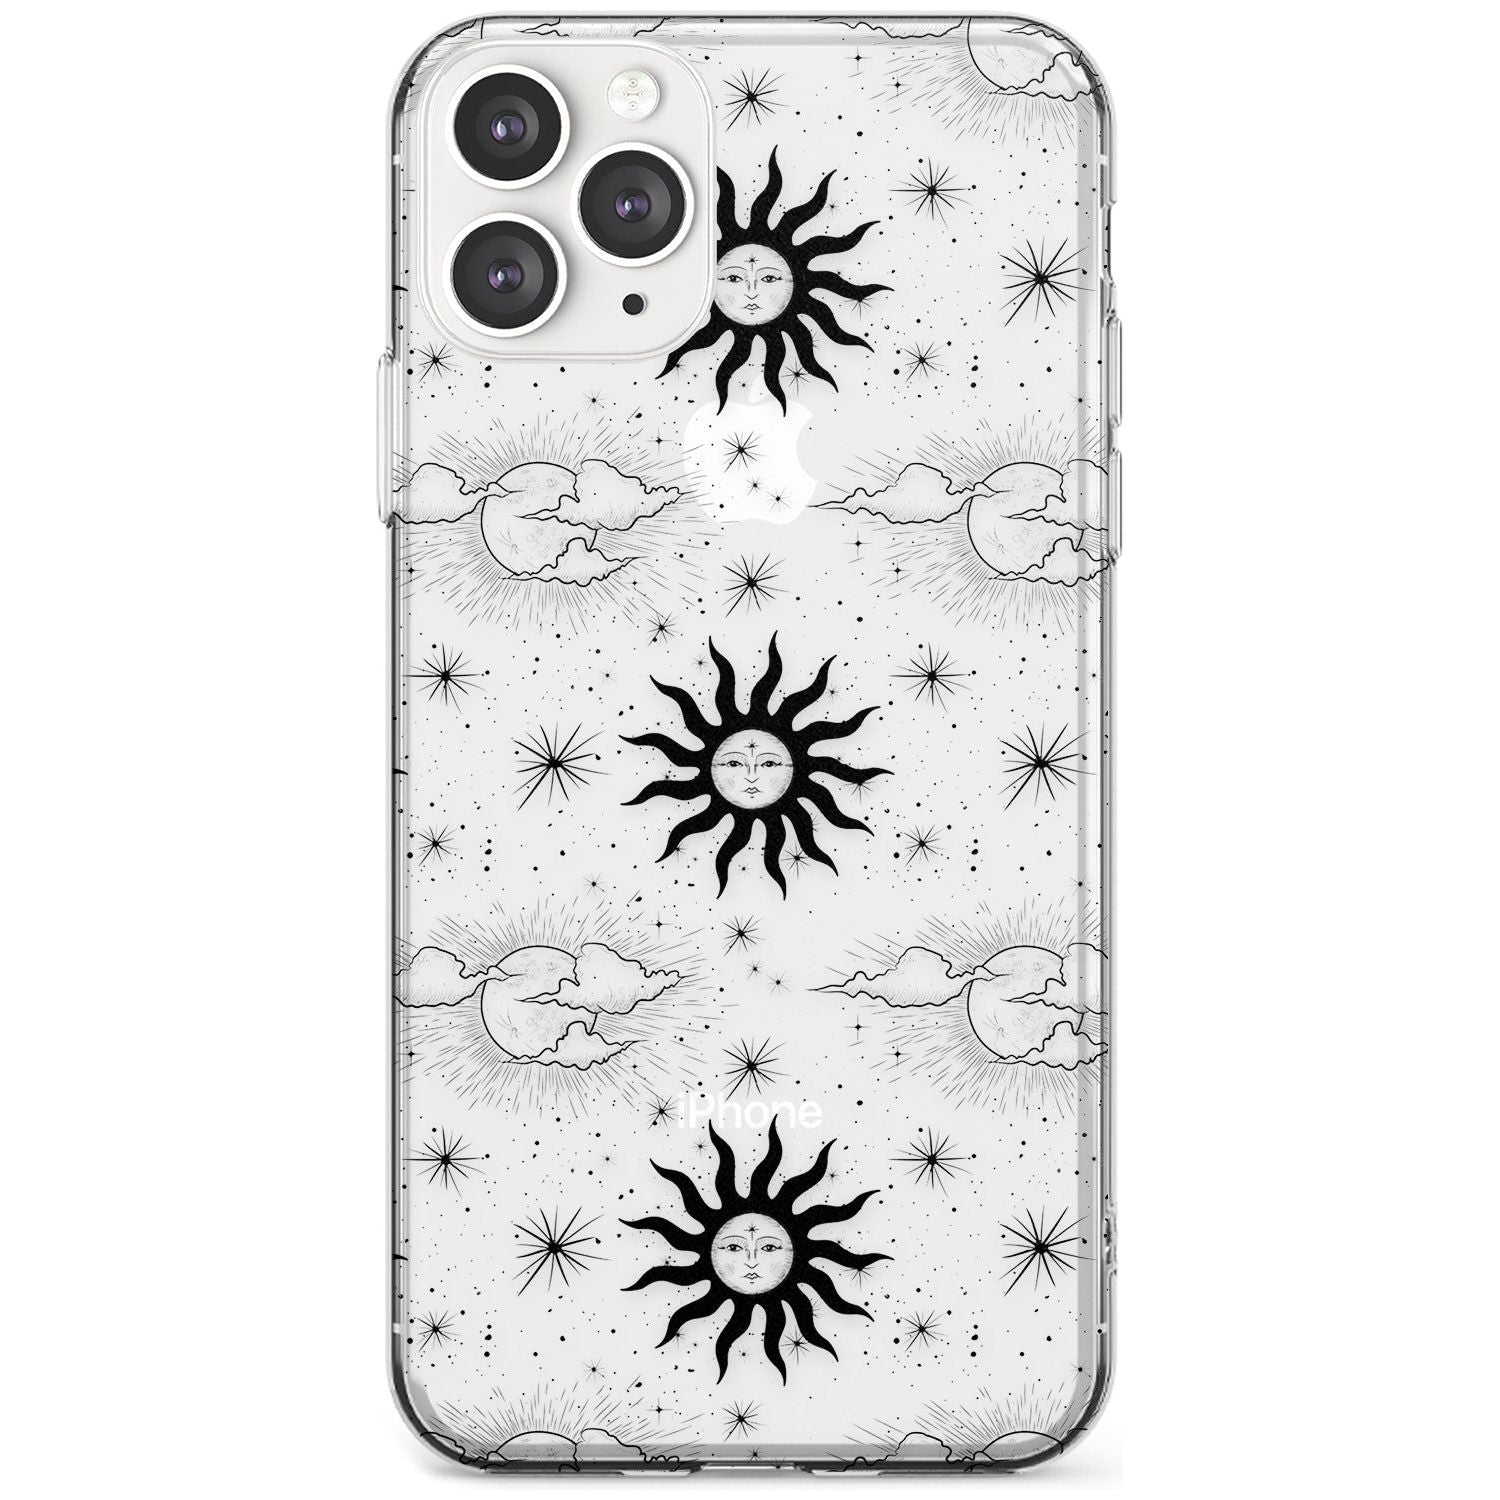 Suns & Clouds Vintage Astrological Slim TPU Phone Case for iPhone 11 Pro Max